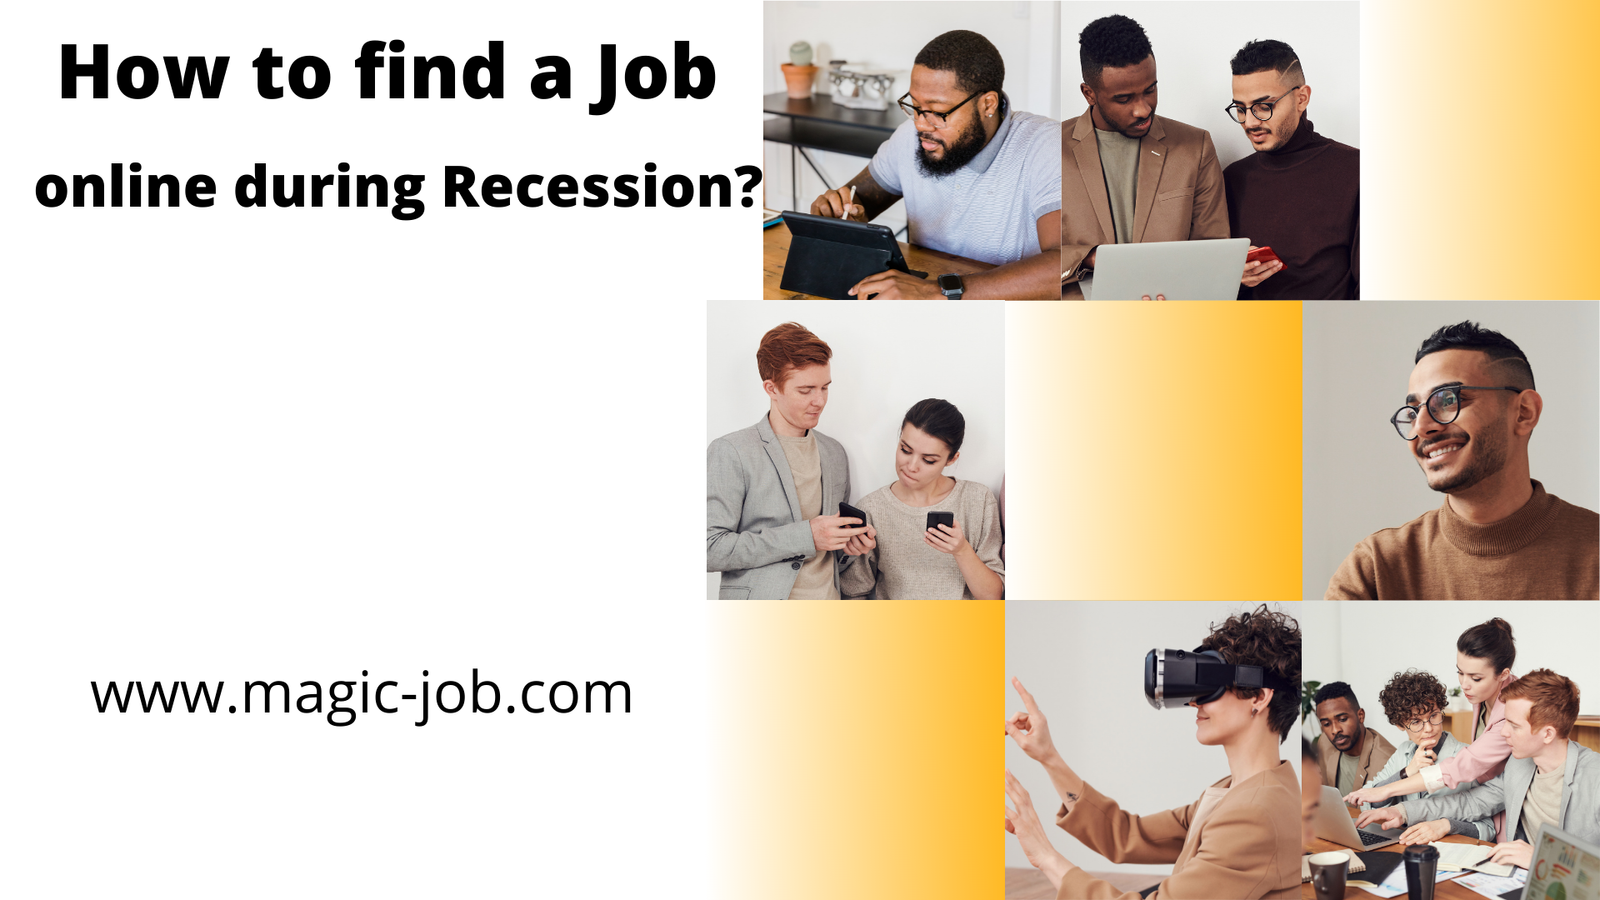 How to Find a Job Online During a Recession? image